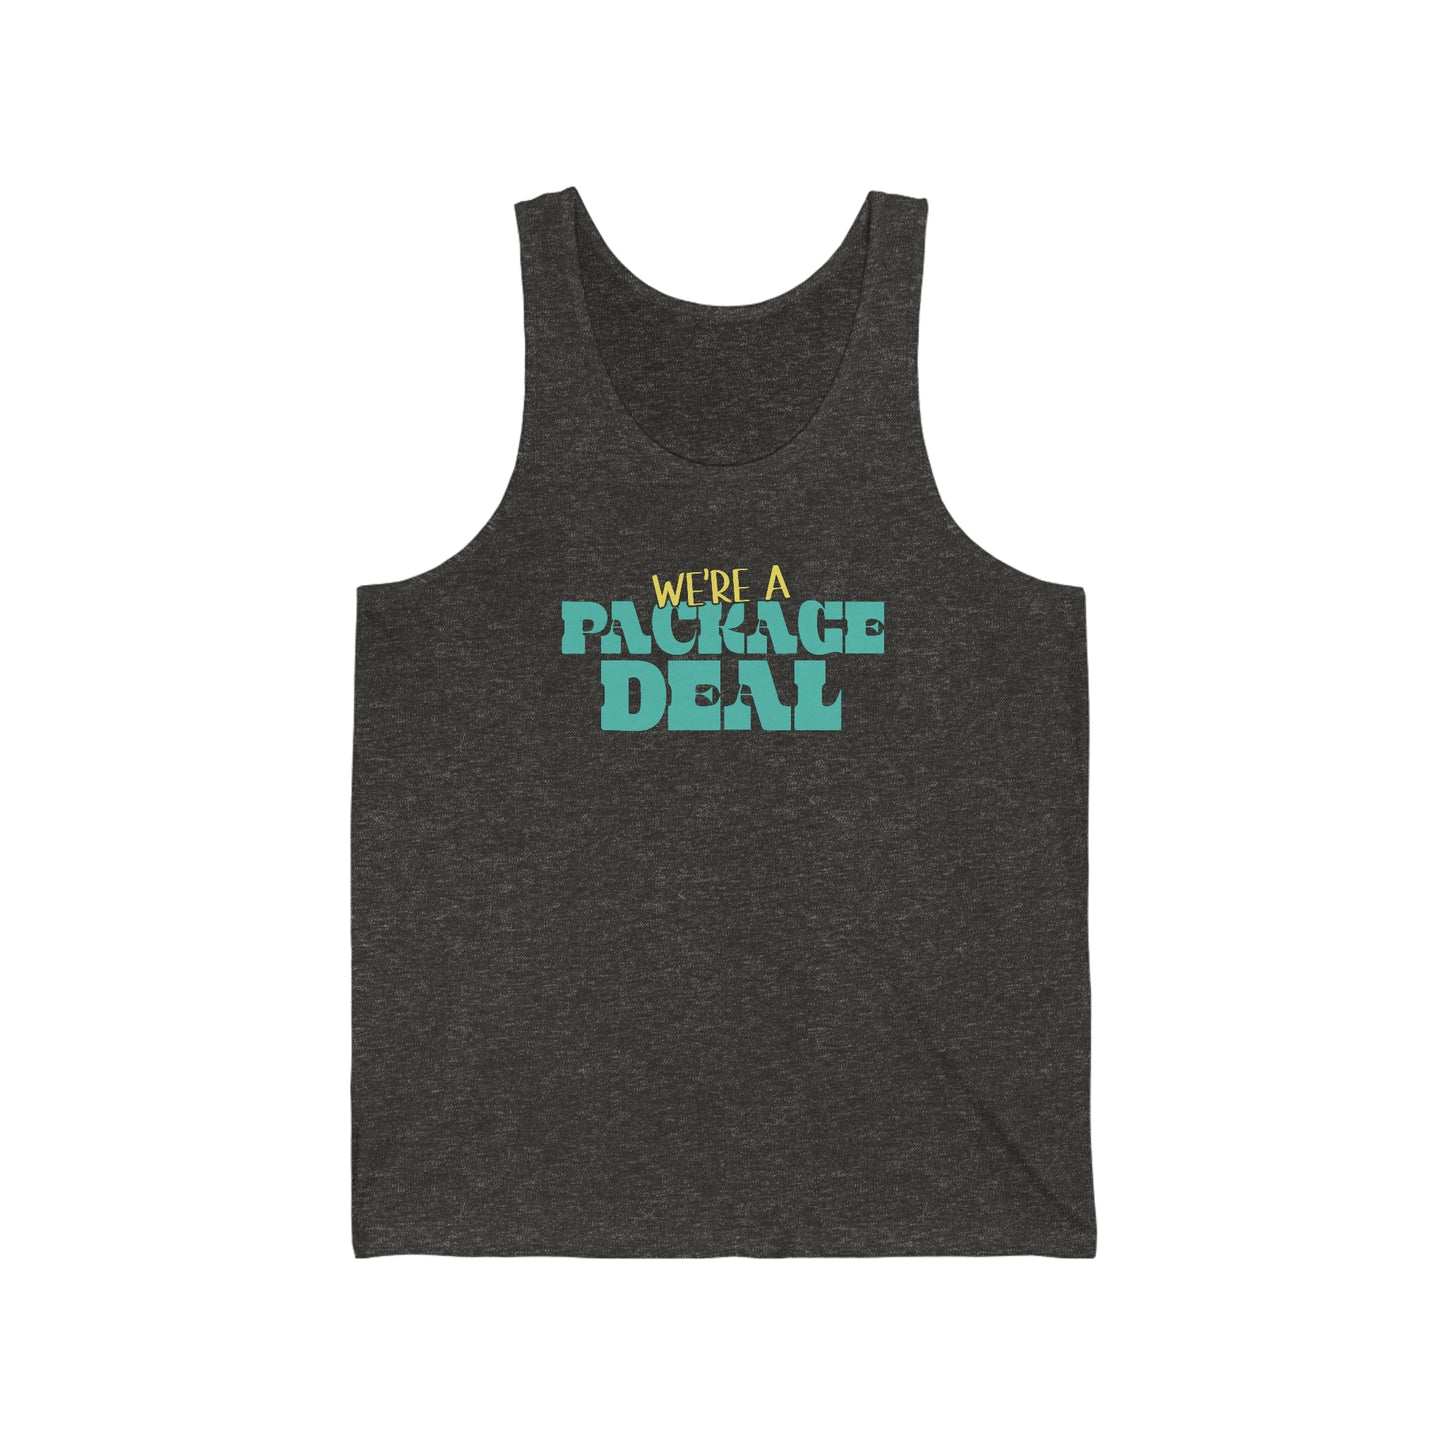 We're A Package Deal Unisex Jersey Tank